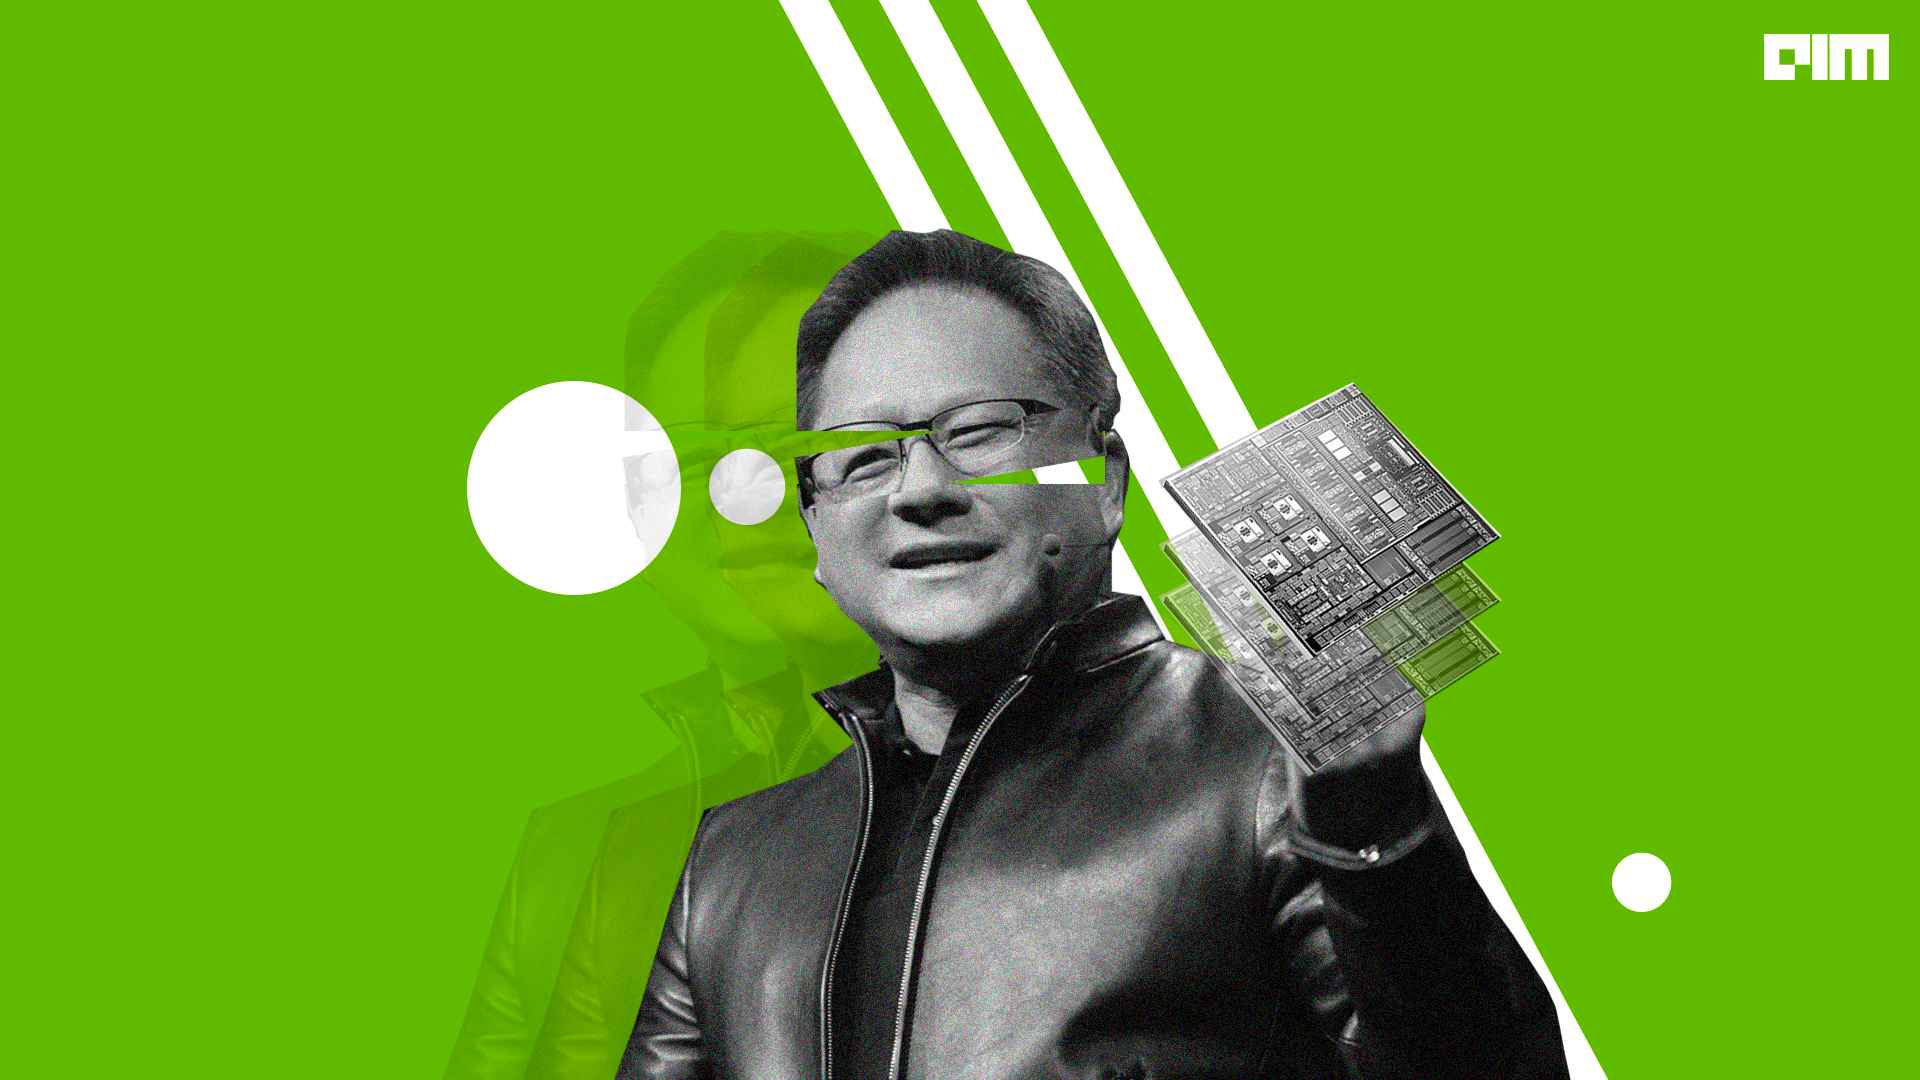 In A Bluefield Vs Fungible Tussle, NVIDIA Comes Up With A Rebuttal